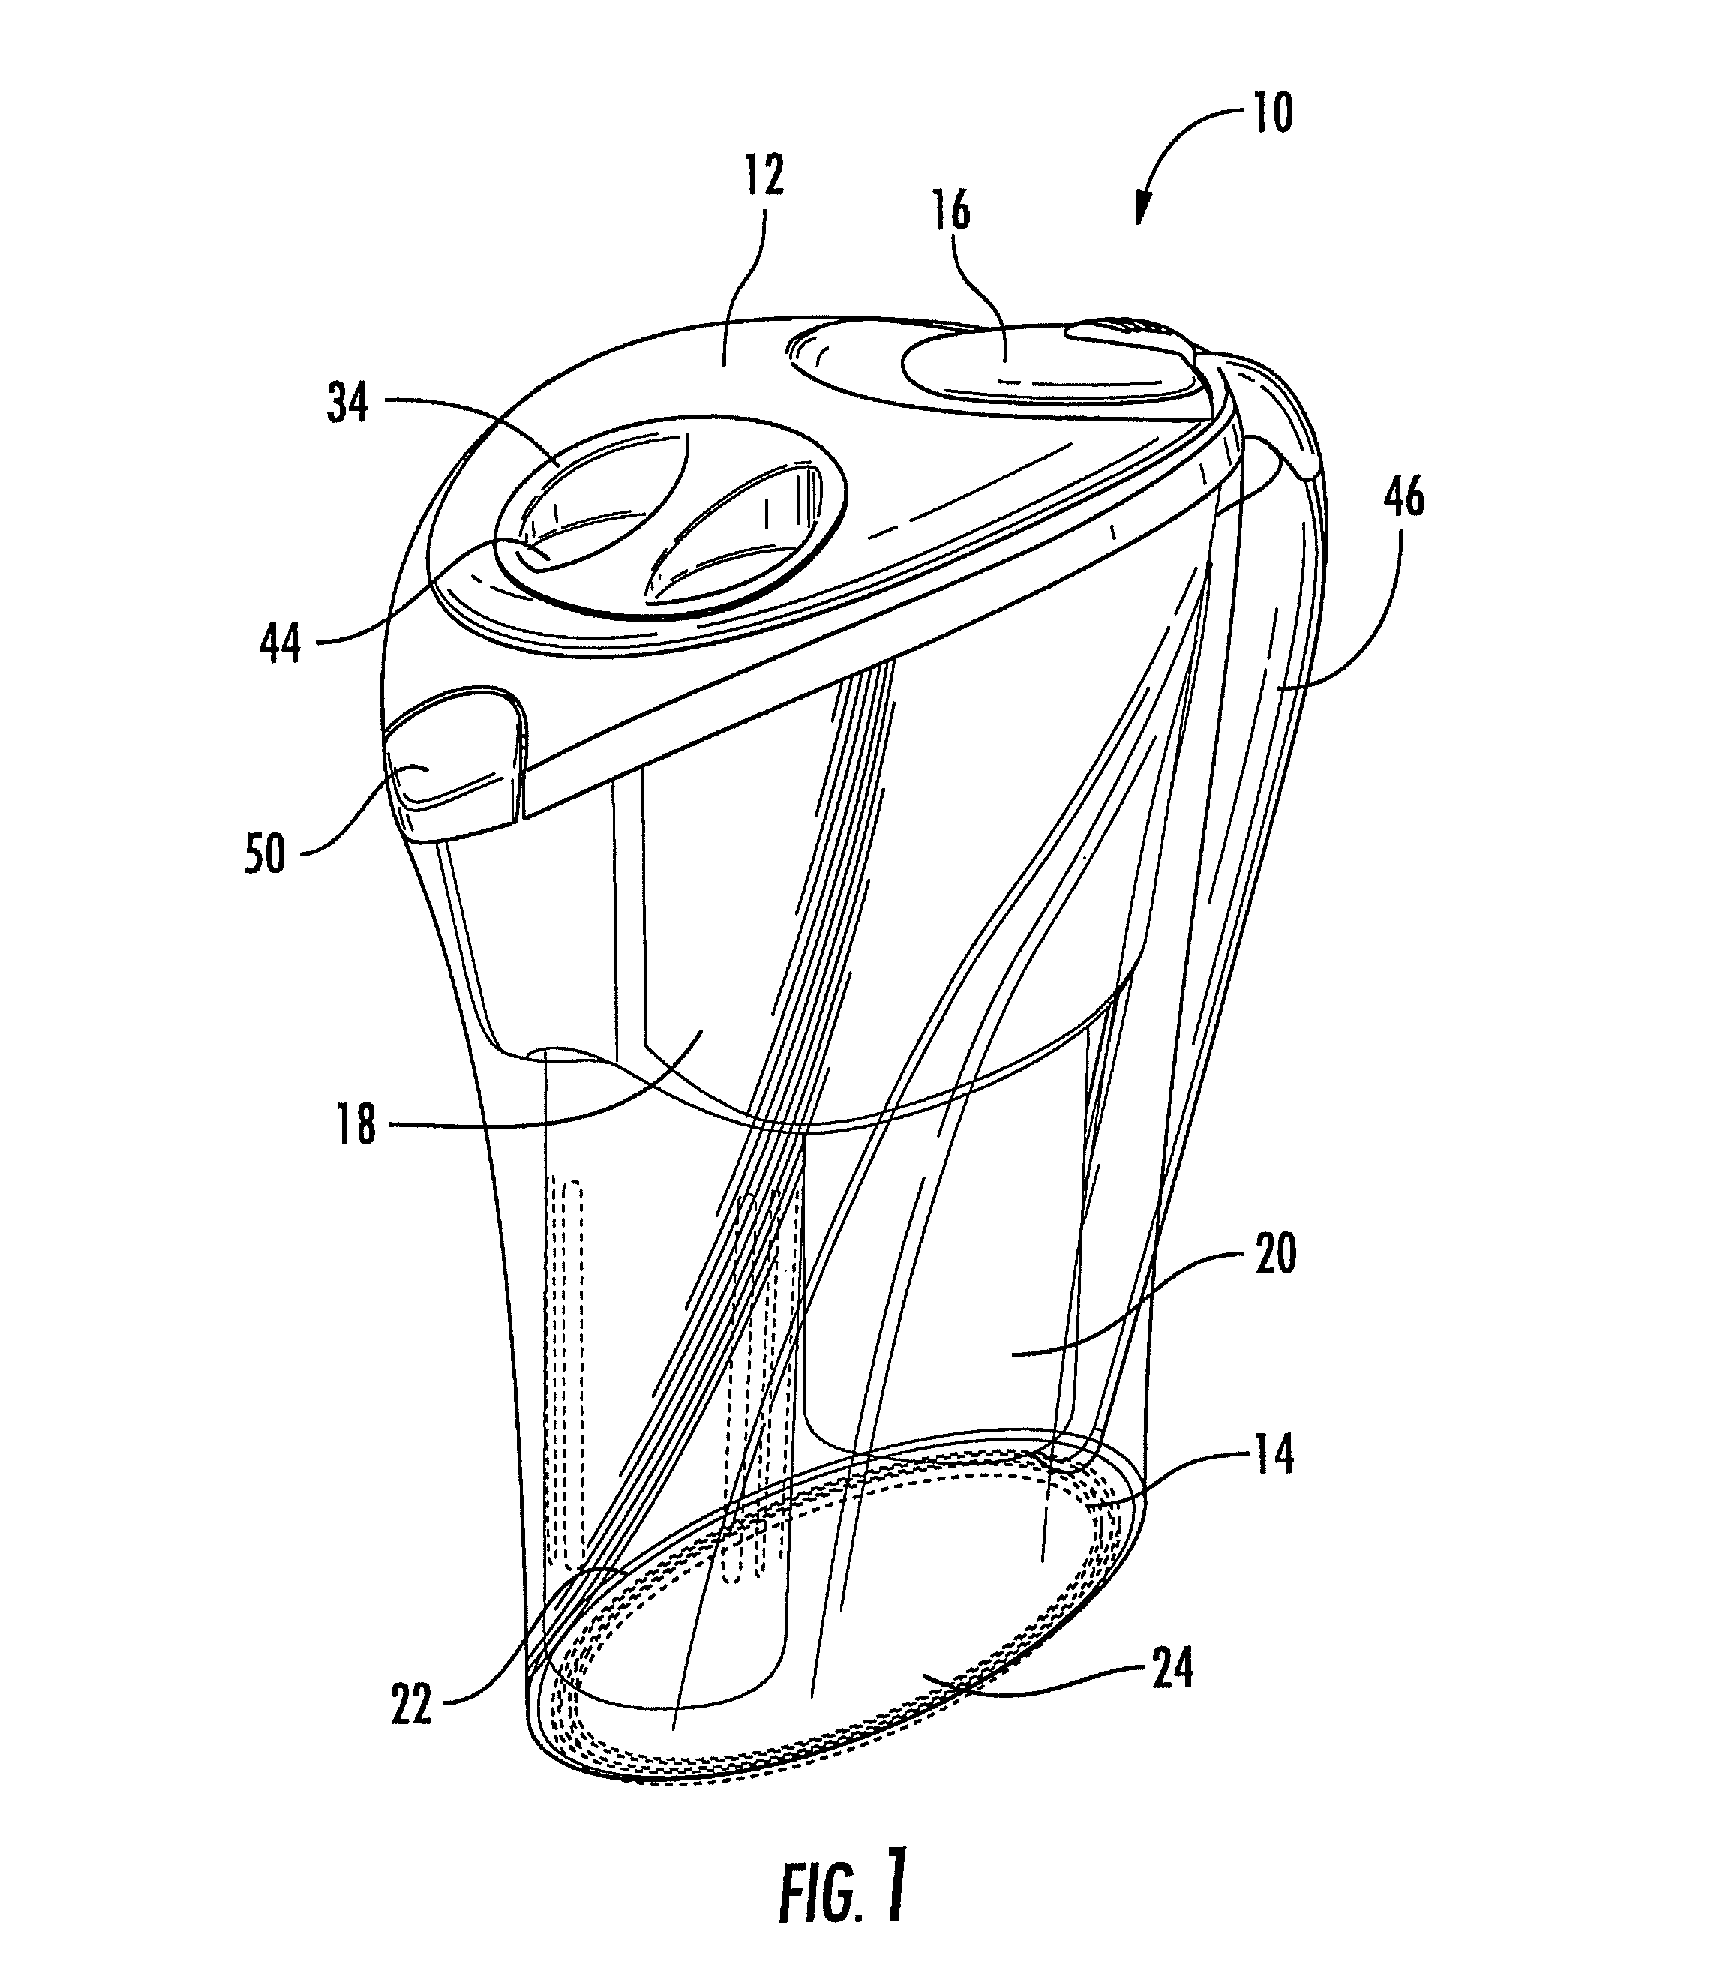 Water purifying and flavor infusion device